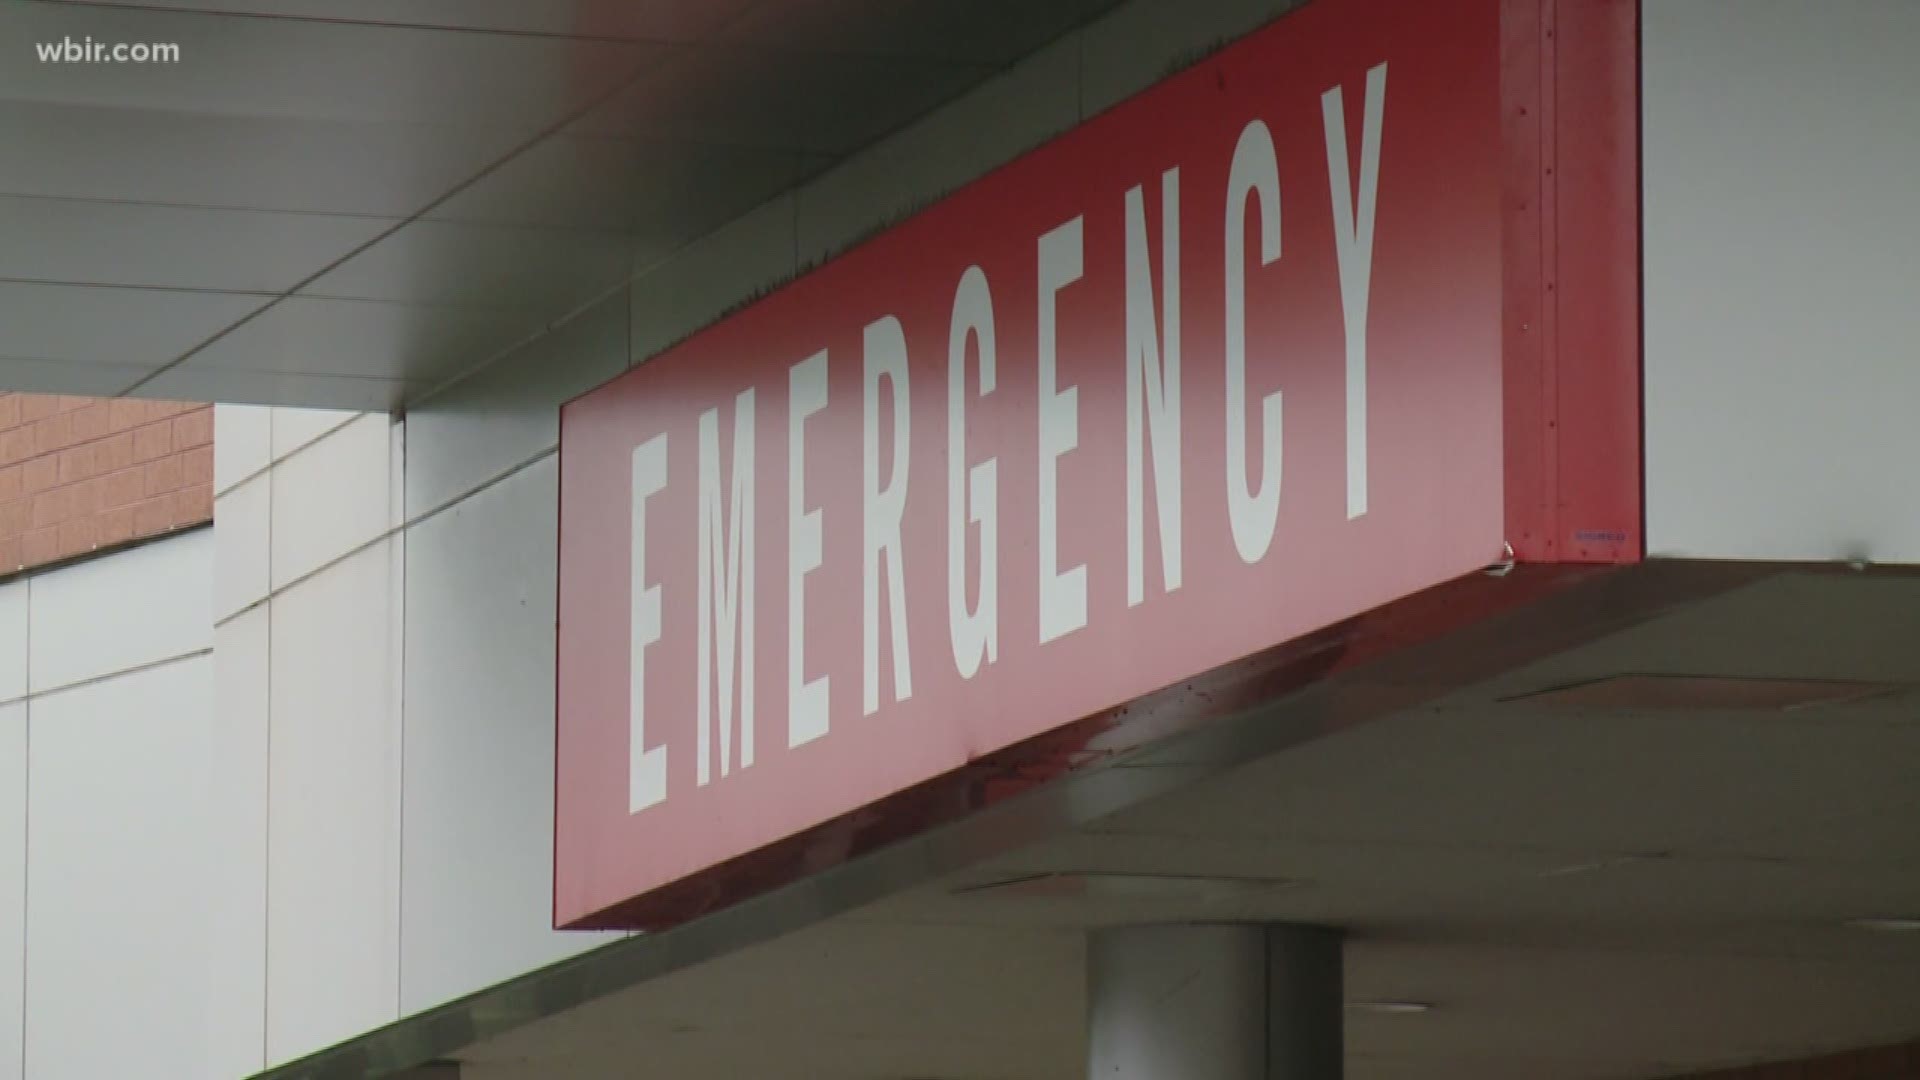 The Tennova hospital in Powell is no longer diverting all ambulances to other emergencies room, an AMR spokesperson said.